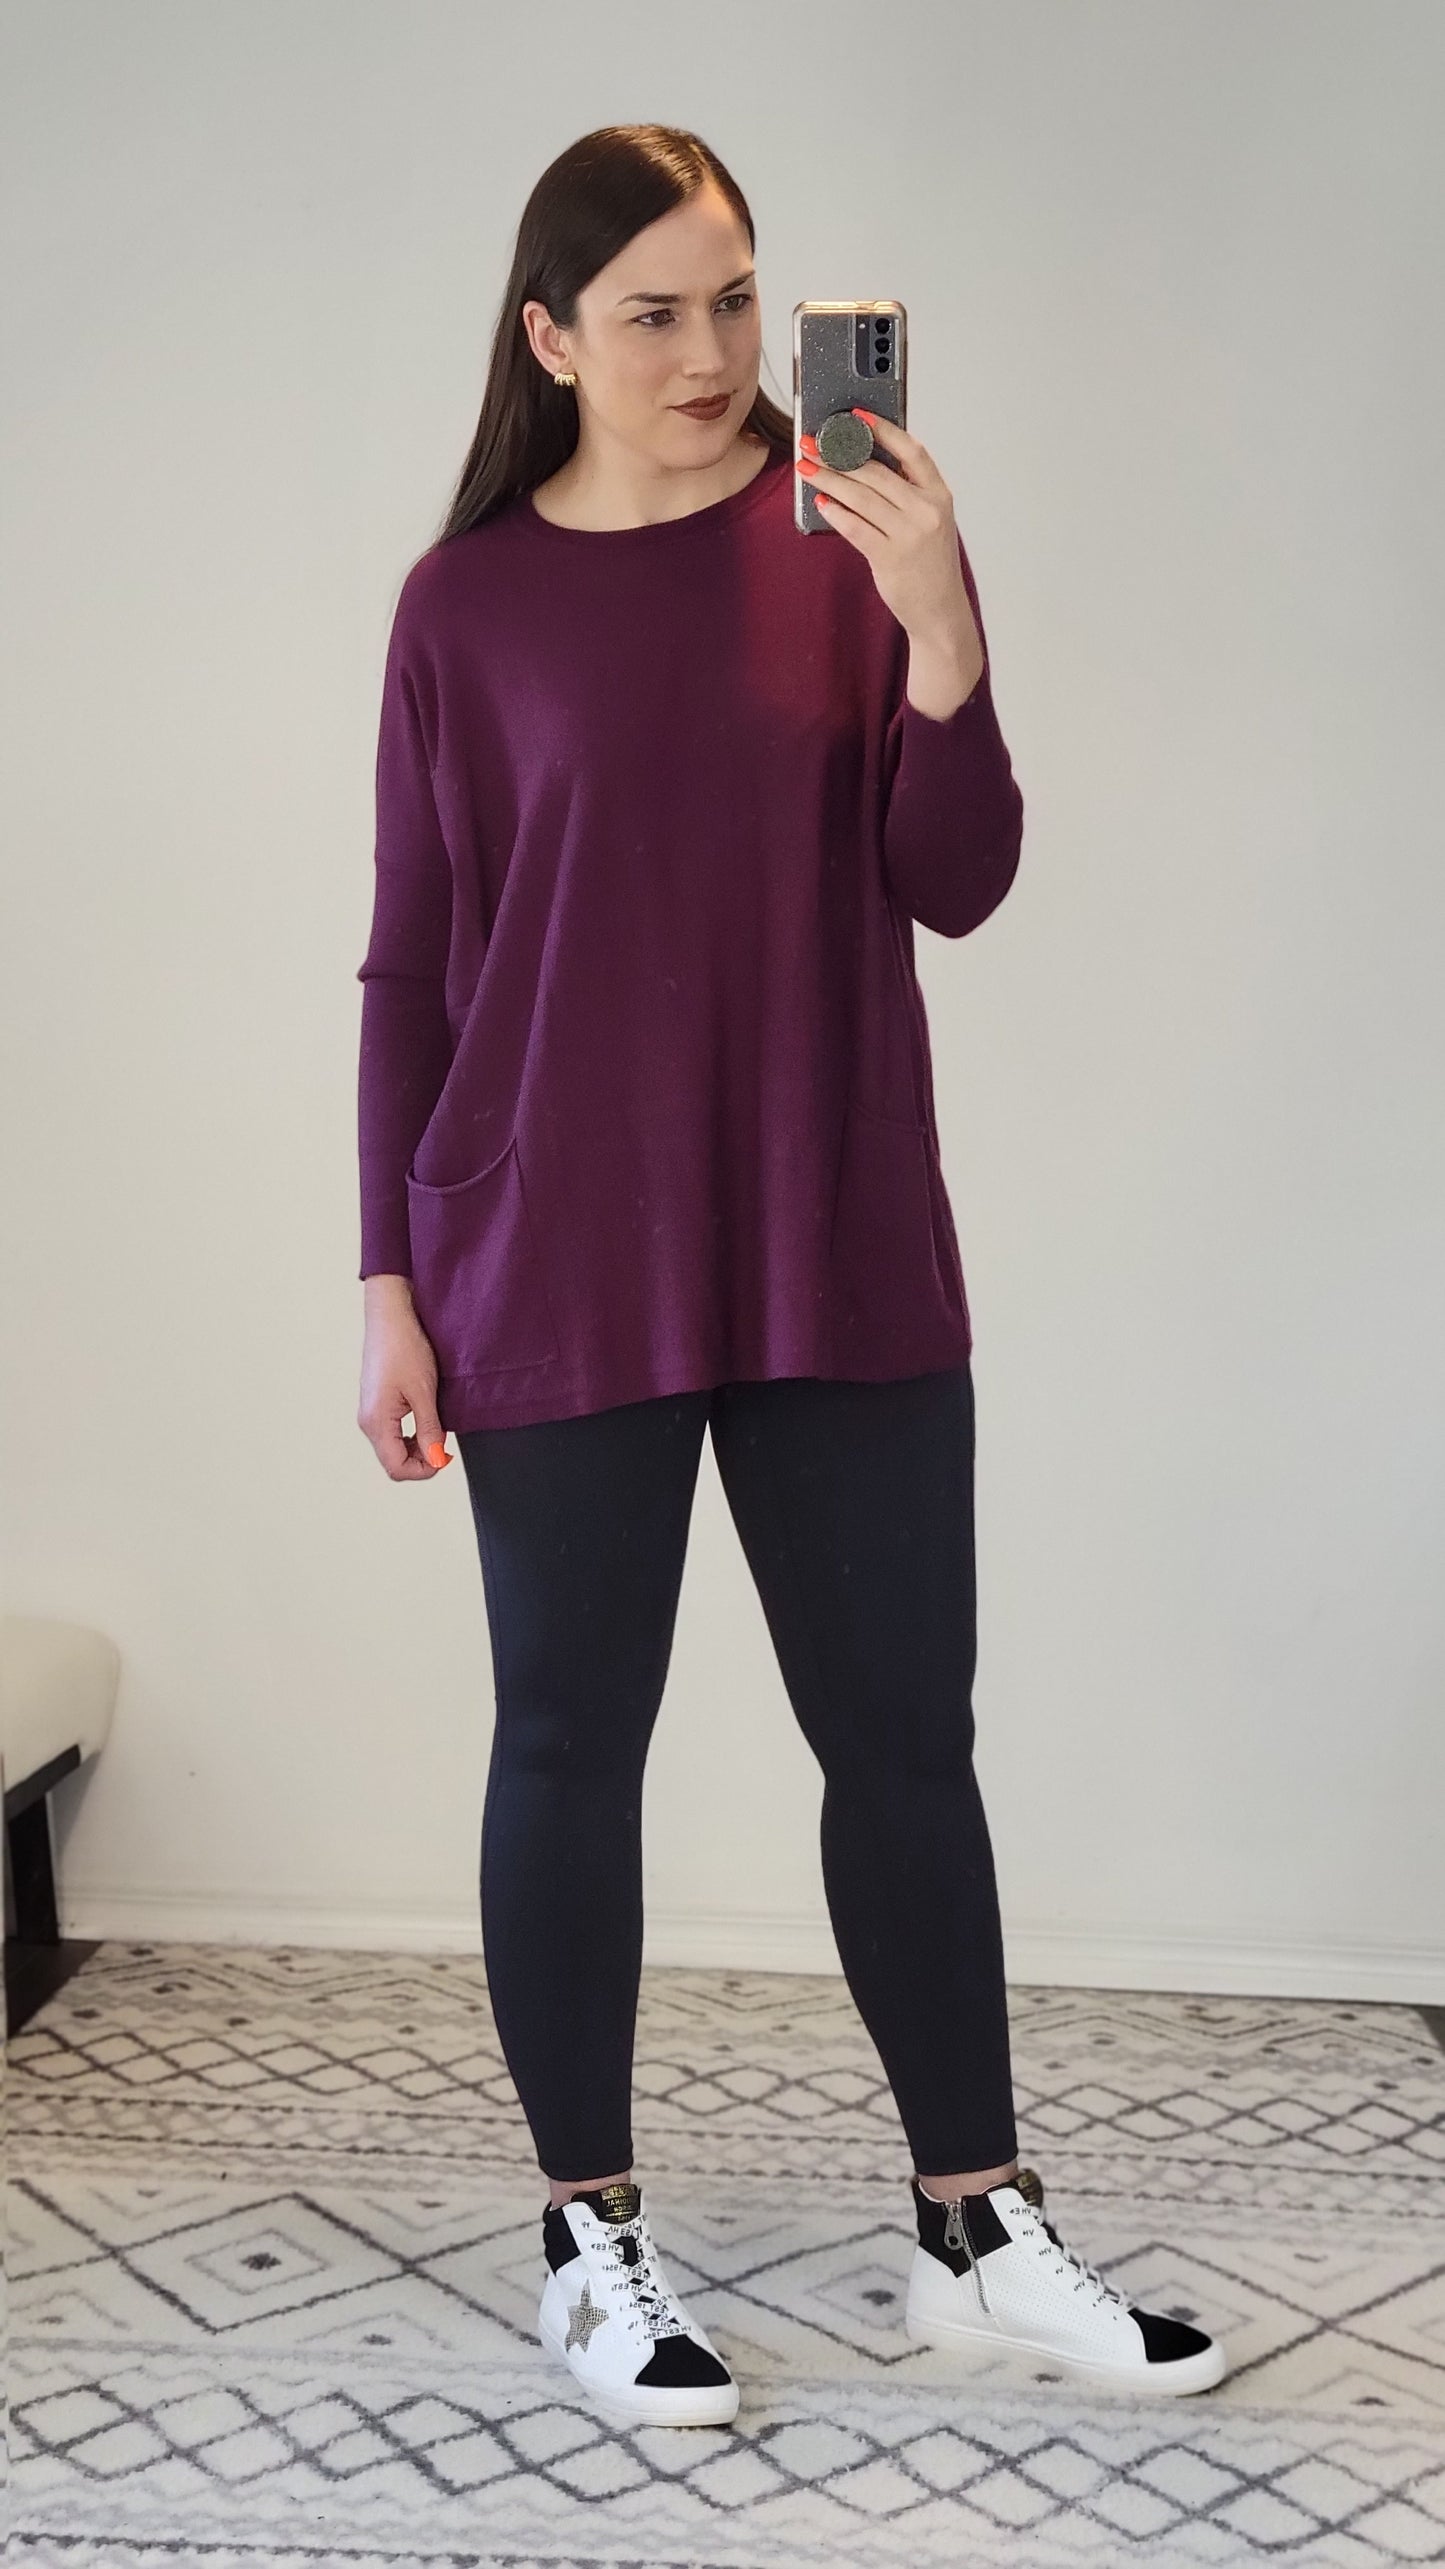 Mulberry Oversize Knit Sweater with Two Front Pockets "Callie"